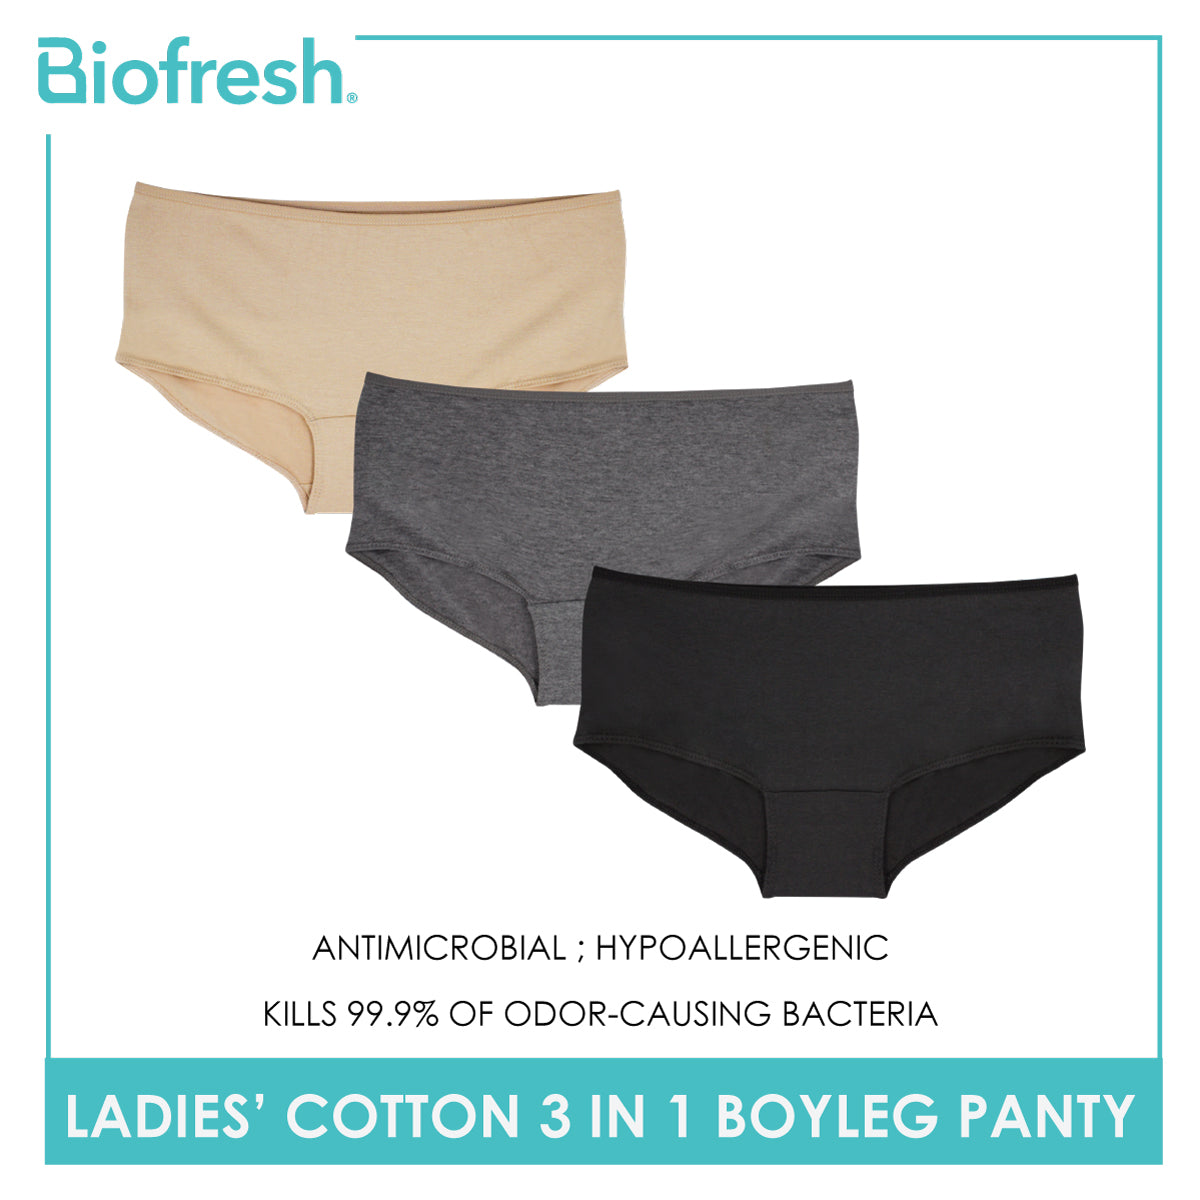 Buy Barbizon Color Your Life 2-in-1 Pack Midwaist Boyleg Panty